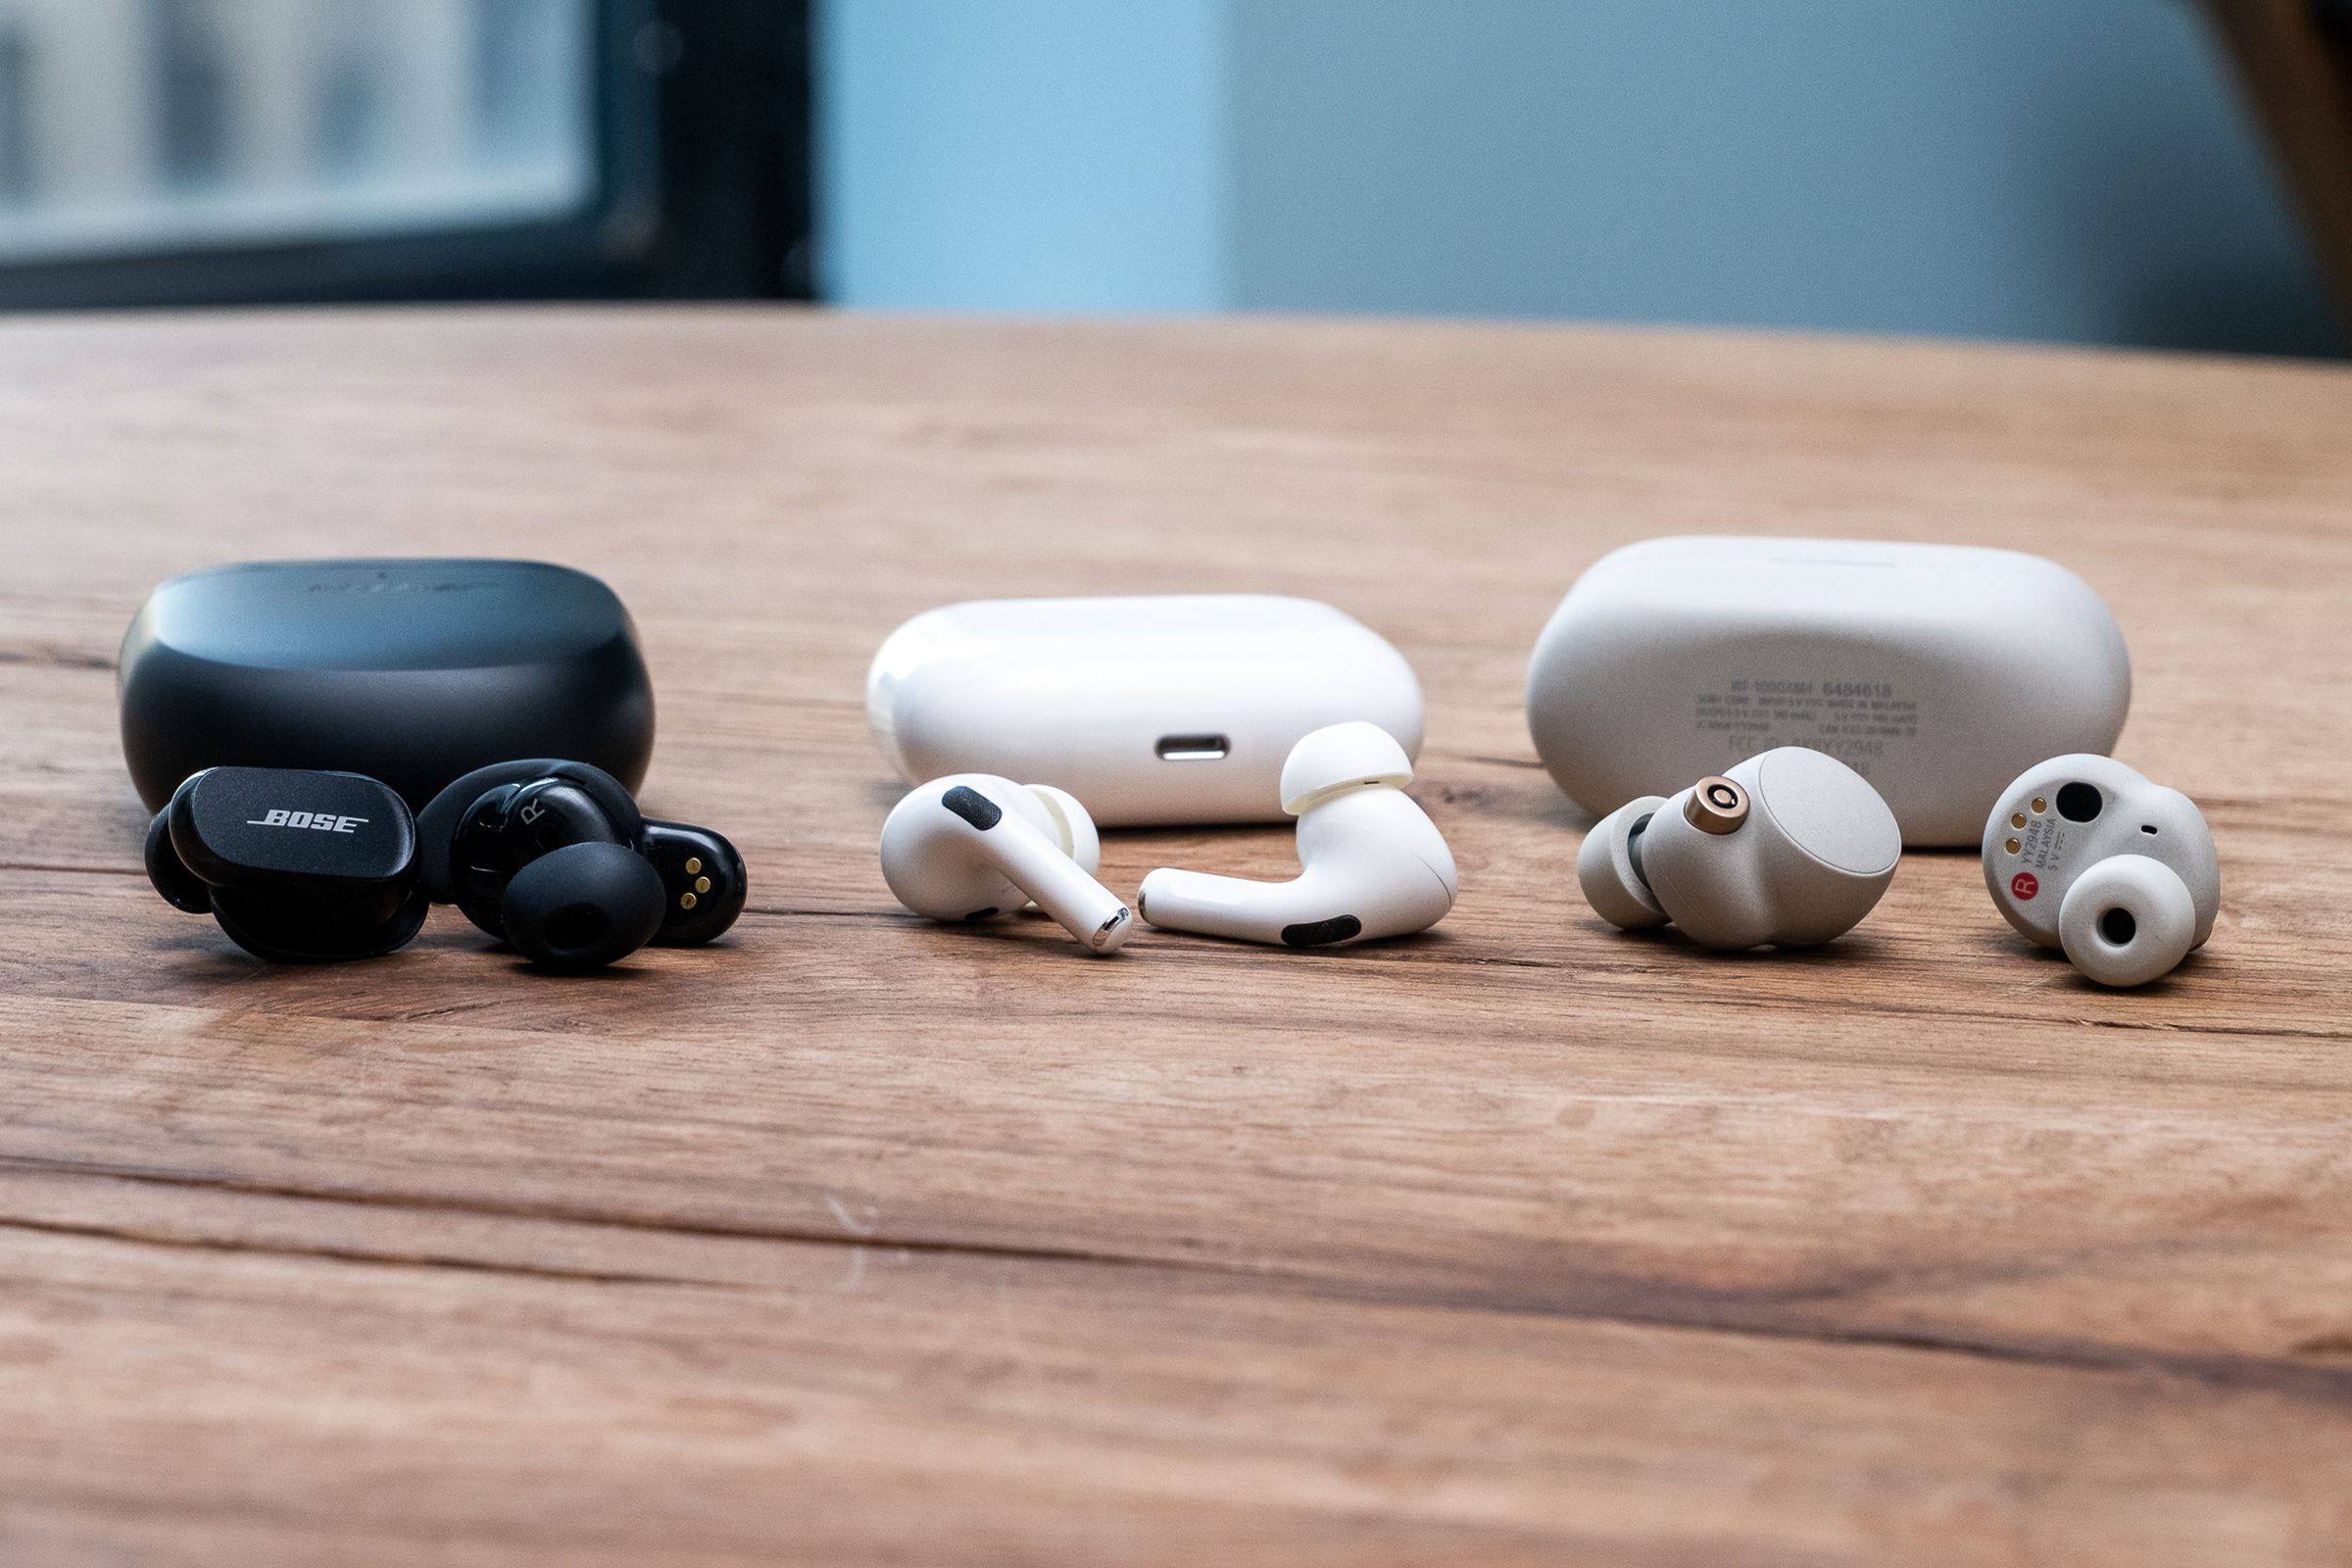 A side-by-side comparison photo of Bose's QuietComfort Earbuds II, Apple's AirPods Pro, and Sony's WF-1000XM4.